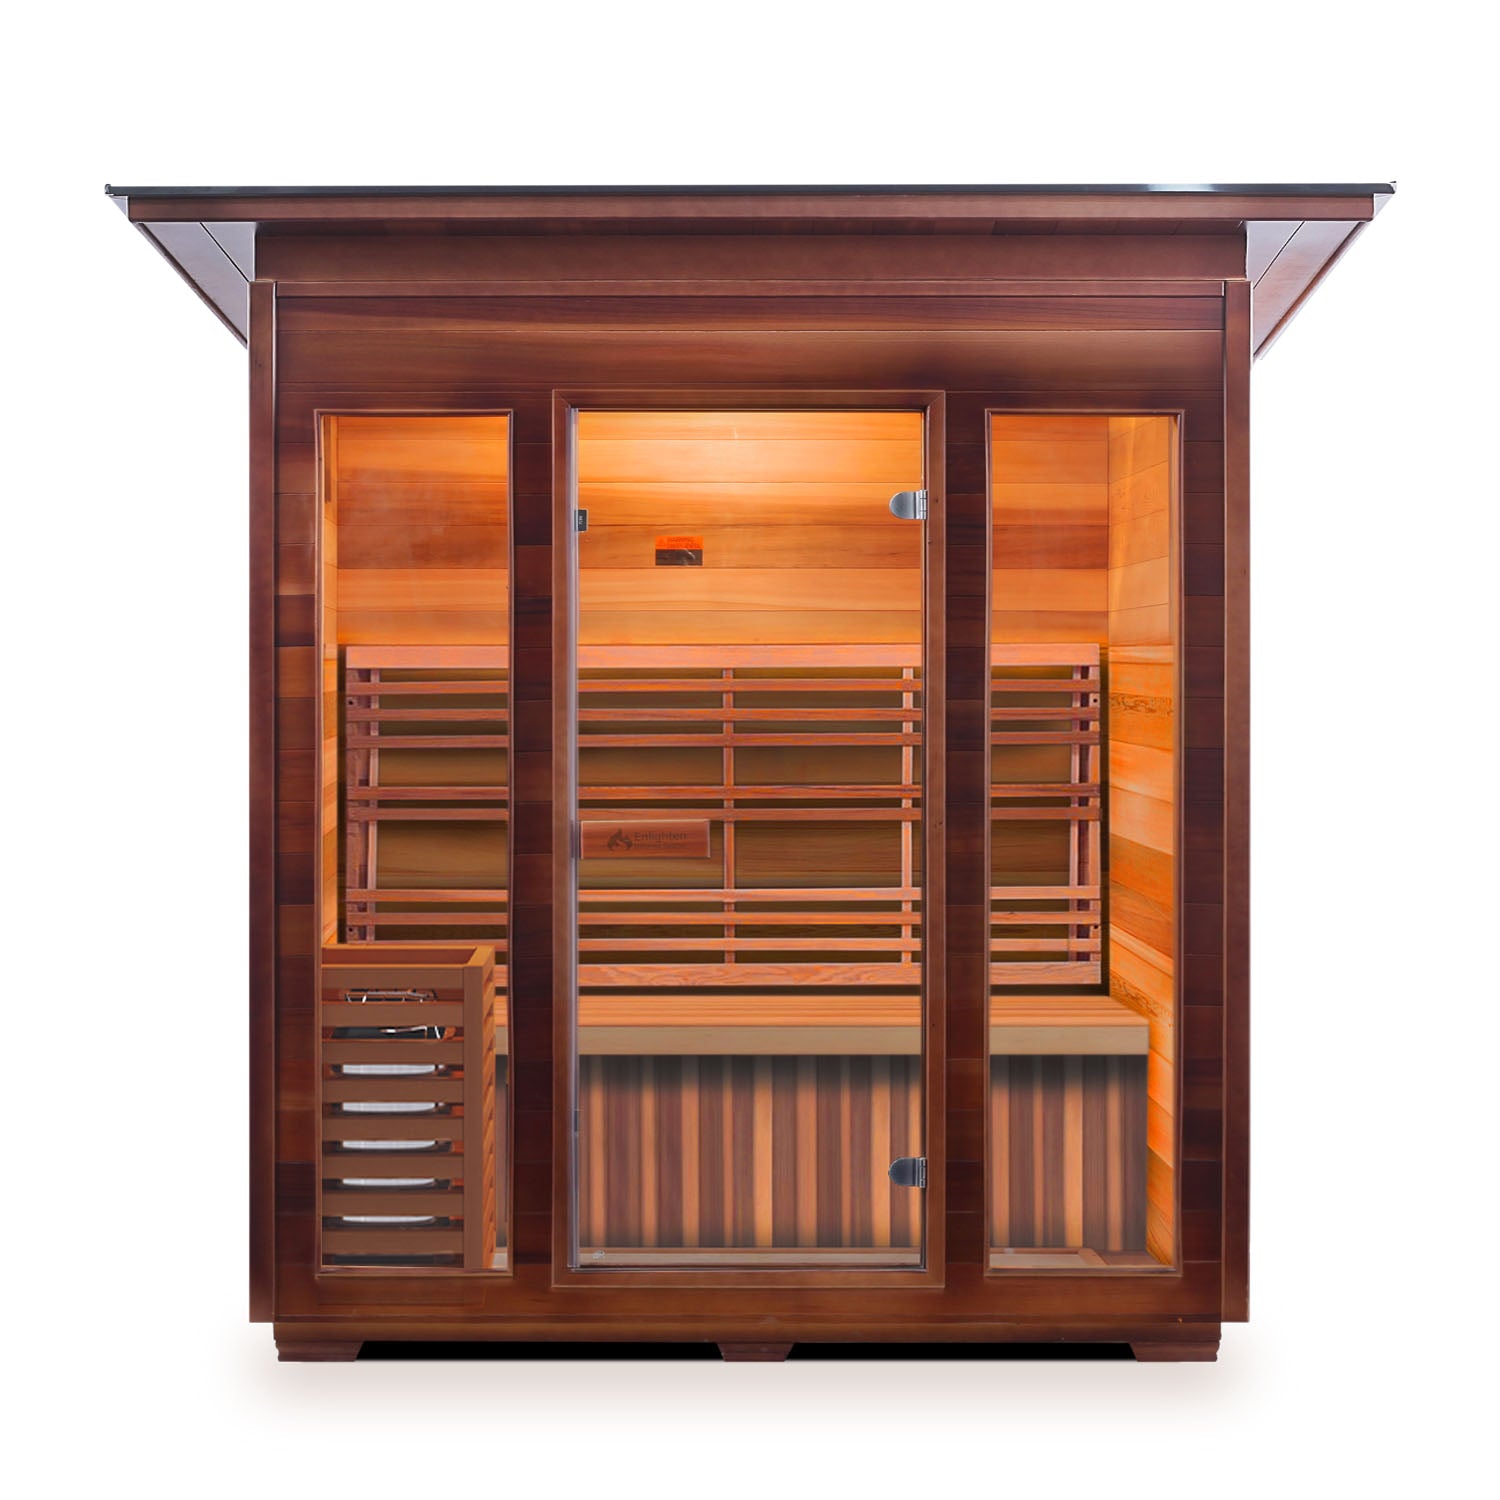 Enlighten sauna SaunaTerra Dry Traditional SunRise 4 Person Indoor Sauna Canadian Red Cedar Wood Outside And Inside with glass door and windows front view